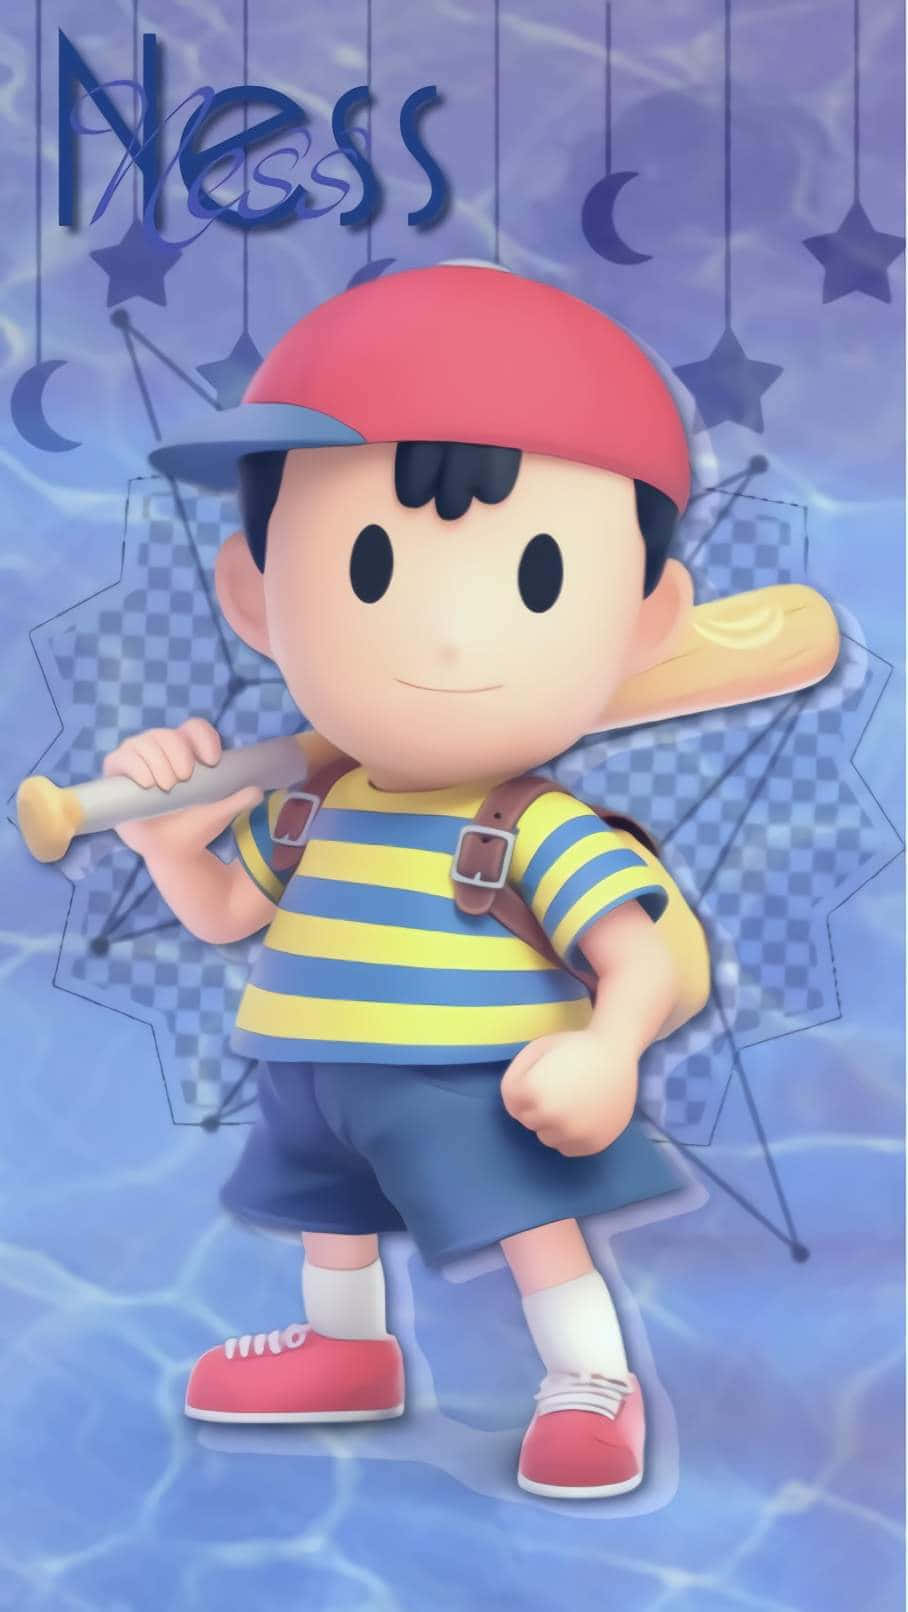 Enjoy the magical world of Earthbound